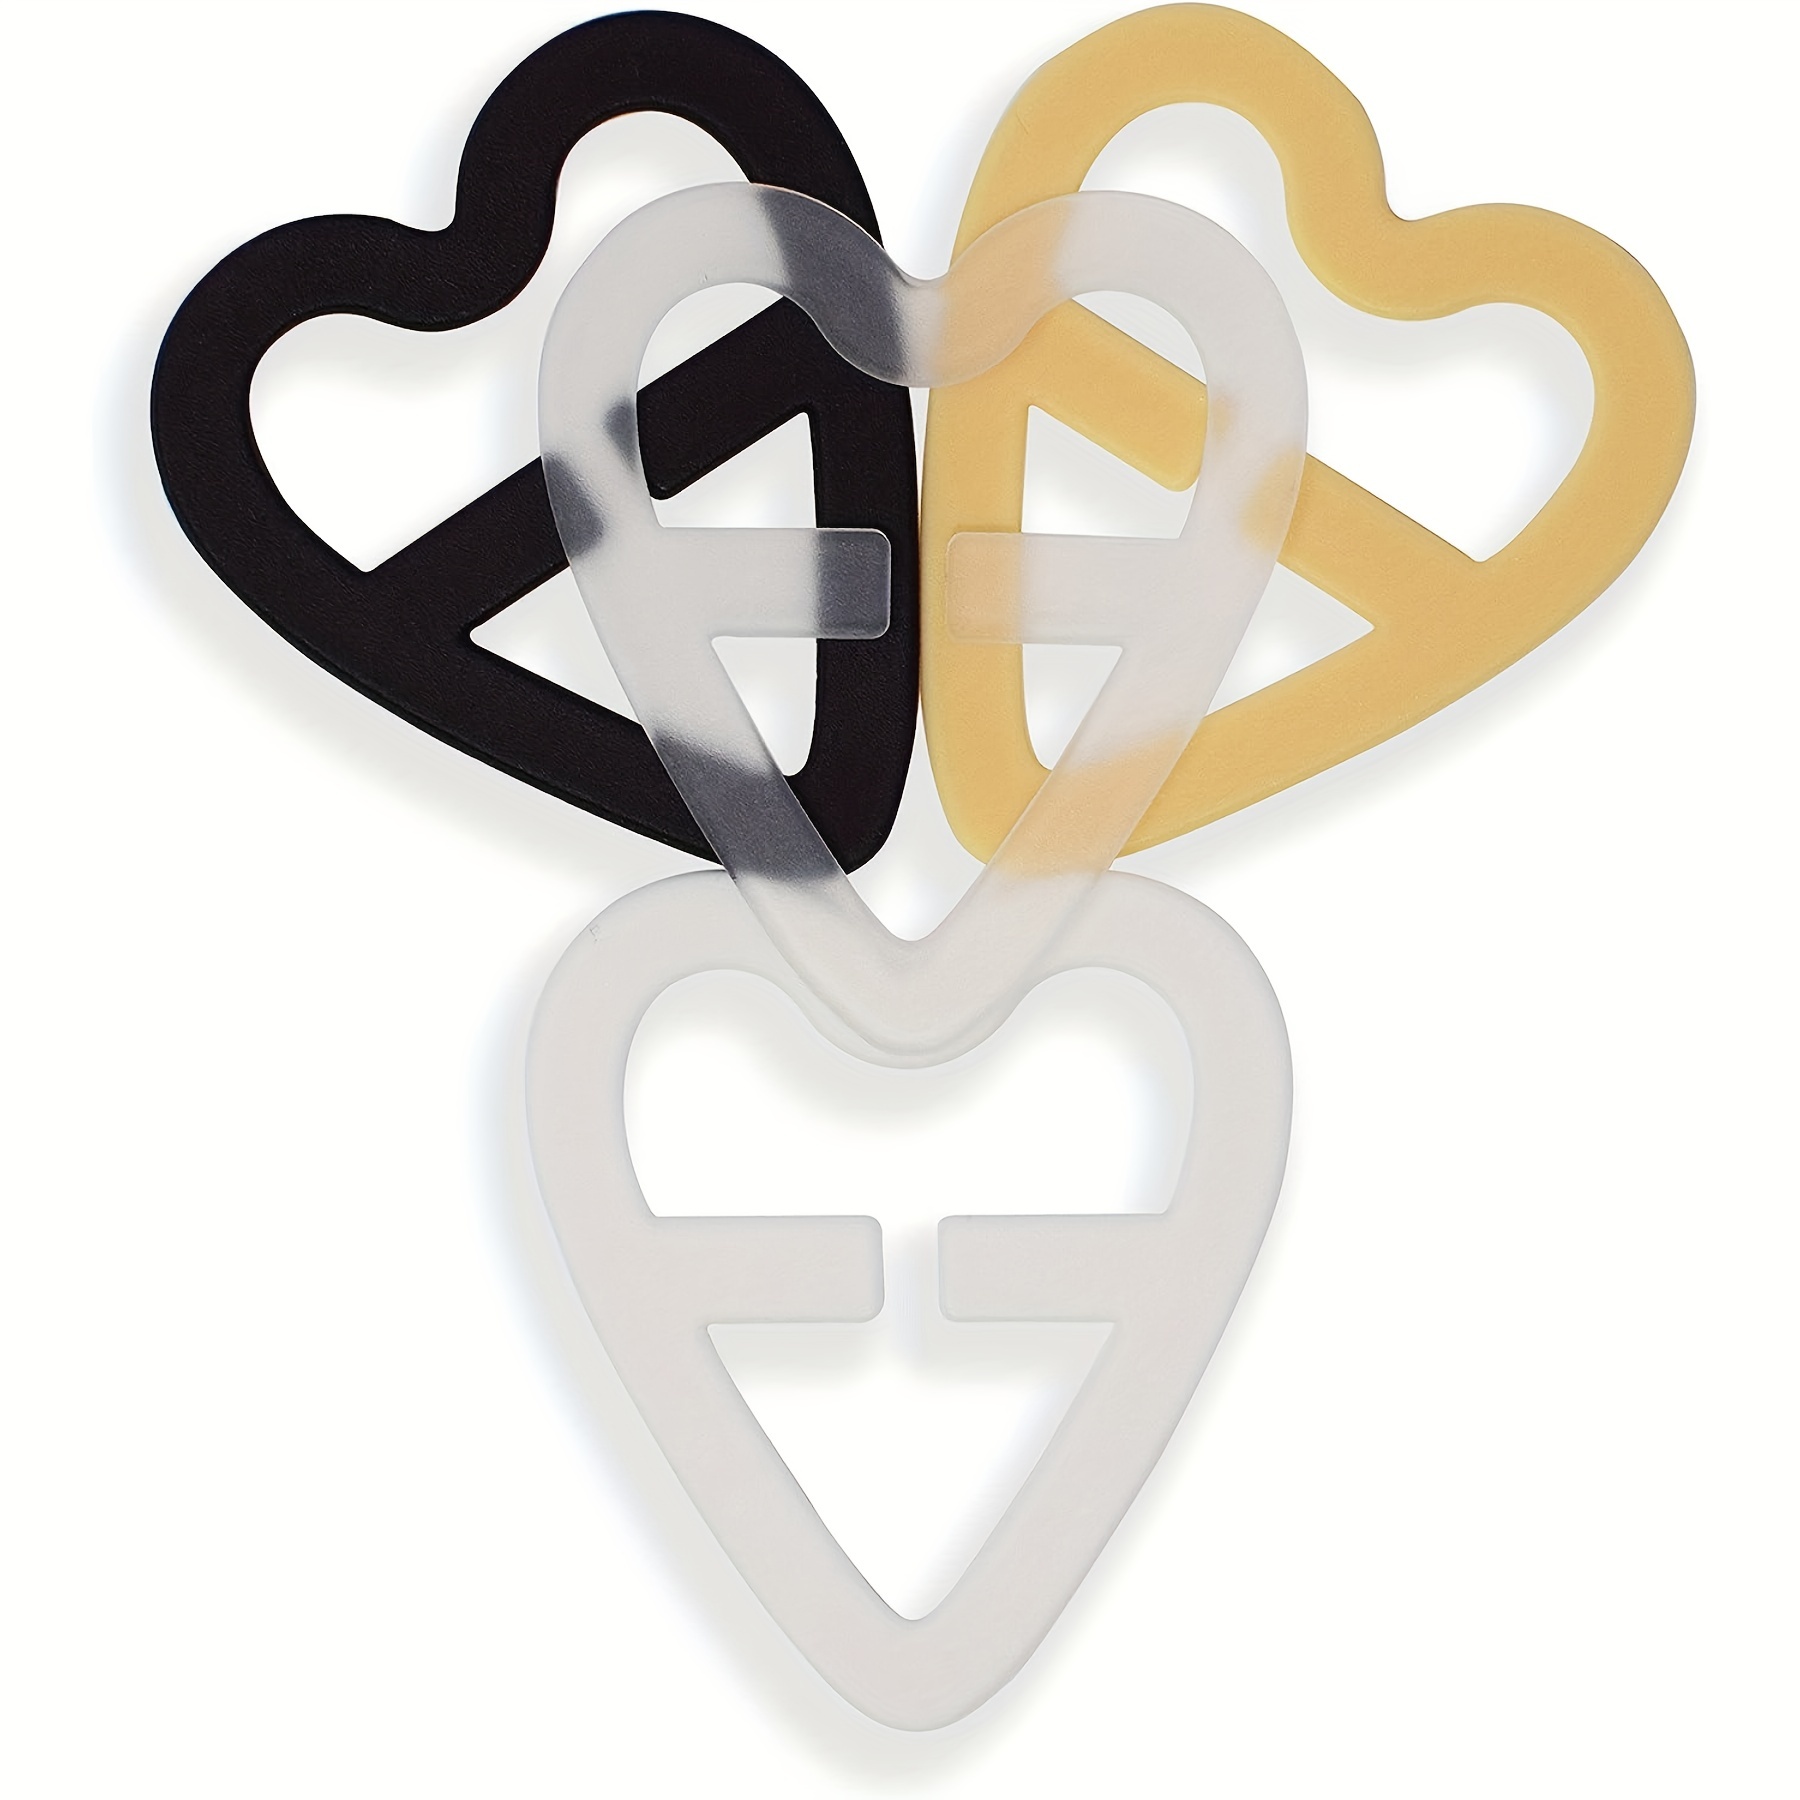 Buy Shyle Bra Strap Heart in Shaped Clips-Pack of 2 At Best Price In India